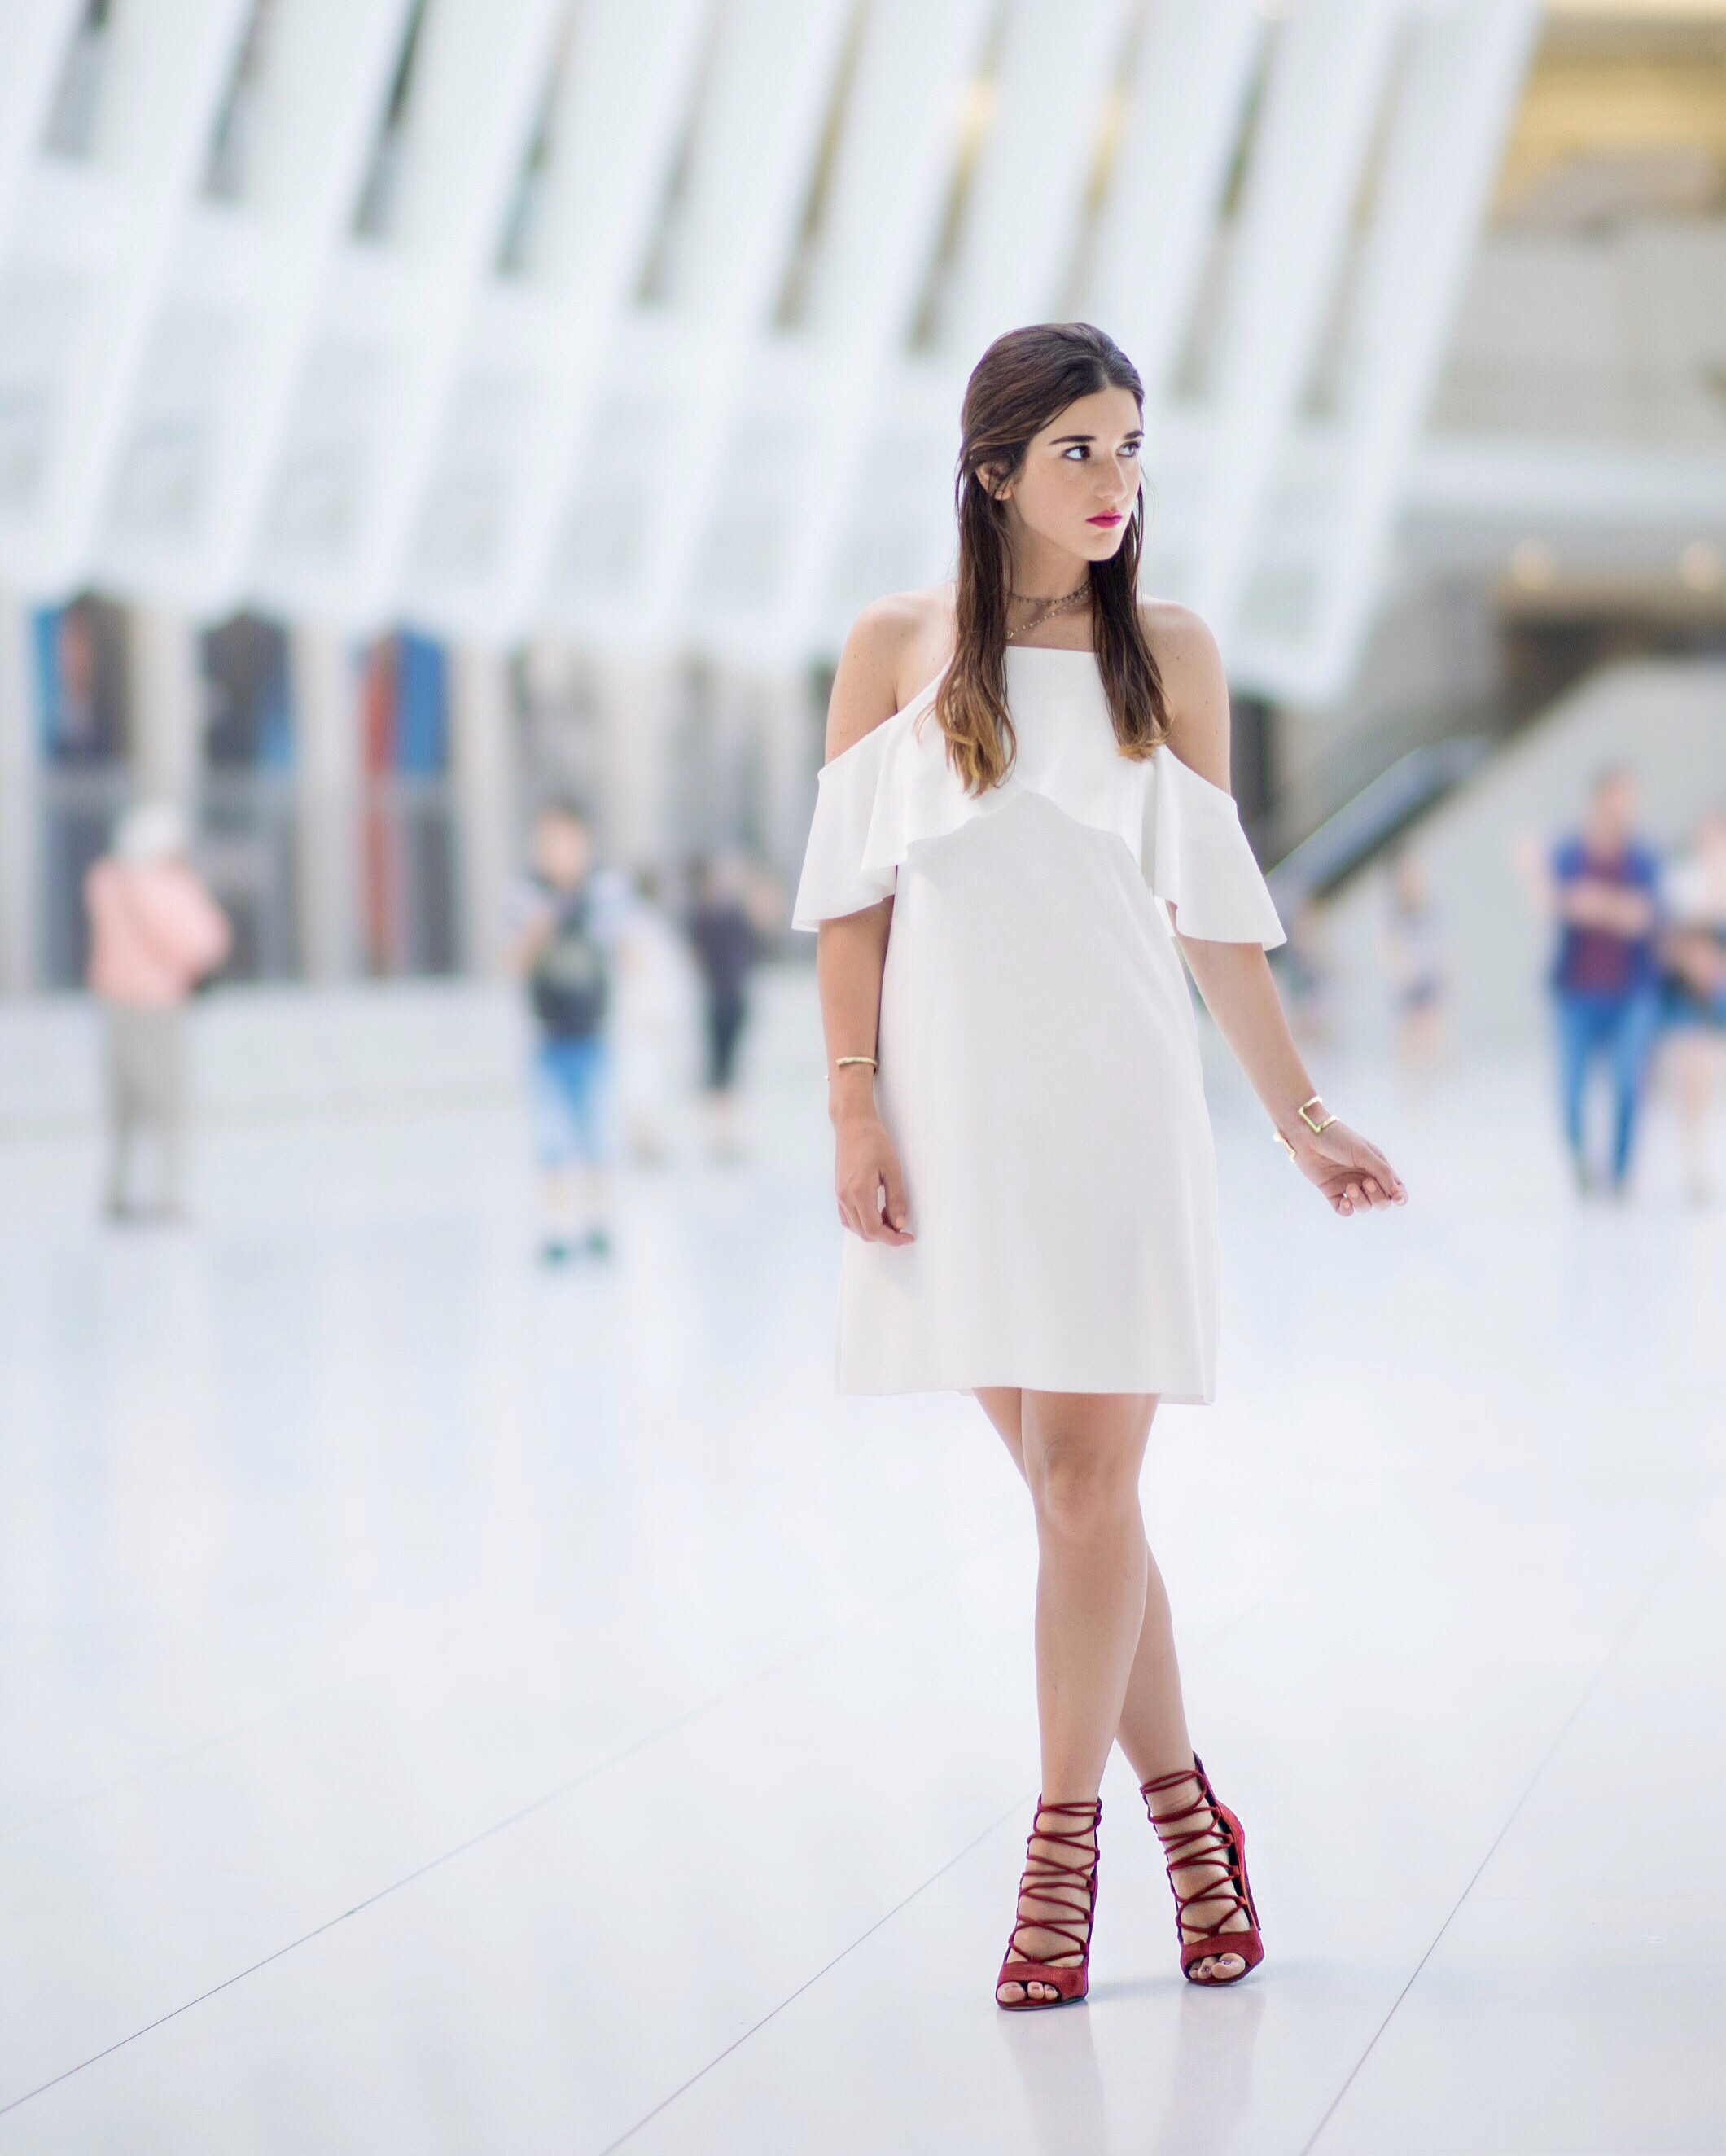 Cold Shoulder White Dress Red Heels Louboutins & Love Fashion Blog Esther Santer NYC Street Style Blogger Outfit OOTD Trendy French Connection Zara Beaded Chokers Jewelry Bloomingdale's Girl Women Shoes Hair Inspo Gold Bracelet Pretty Color Photoshoot.jpg